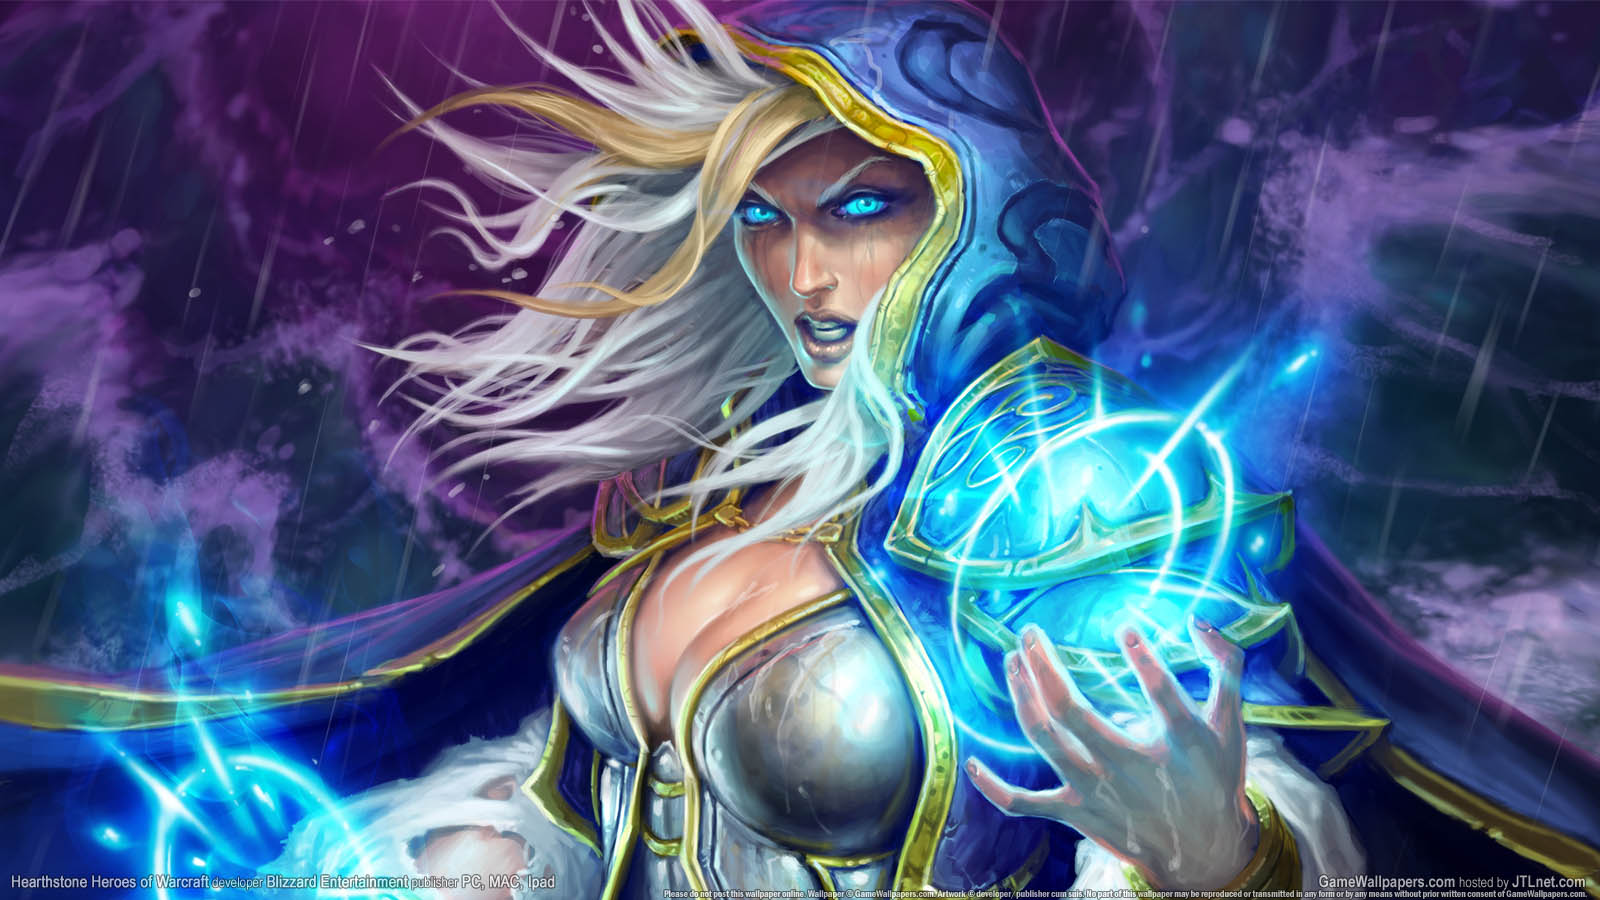 Hearthstone: Heroes of Warcraft achtergrond 03 1600x900